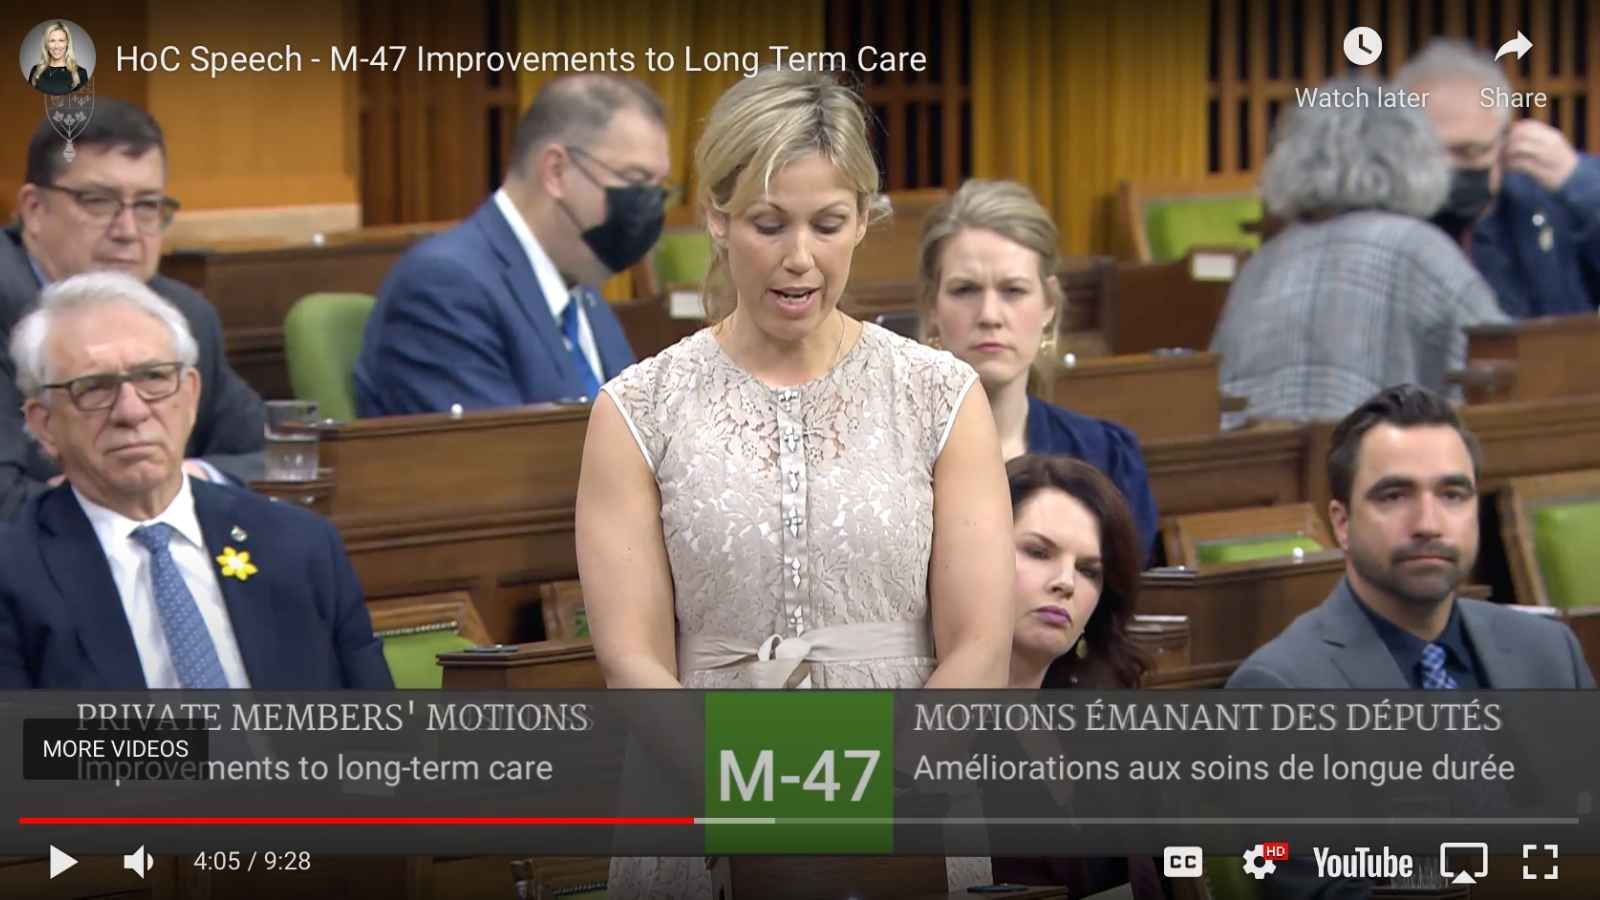 Shelby Kramp-Neuman MP speaks in the House of Commons to M-47 Private Members Bill Improvements to Long Term Care